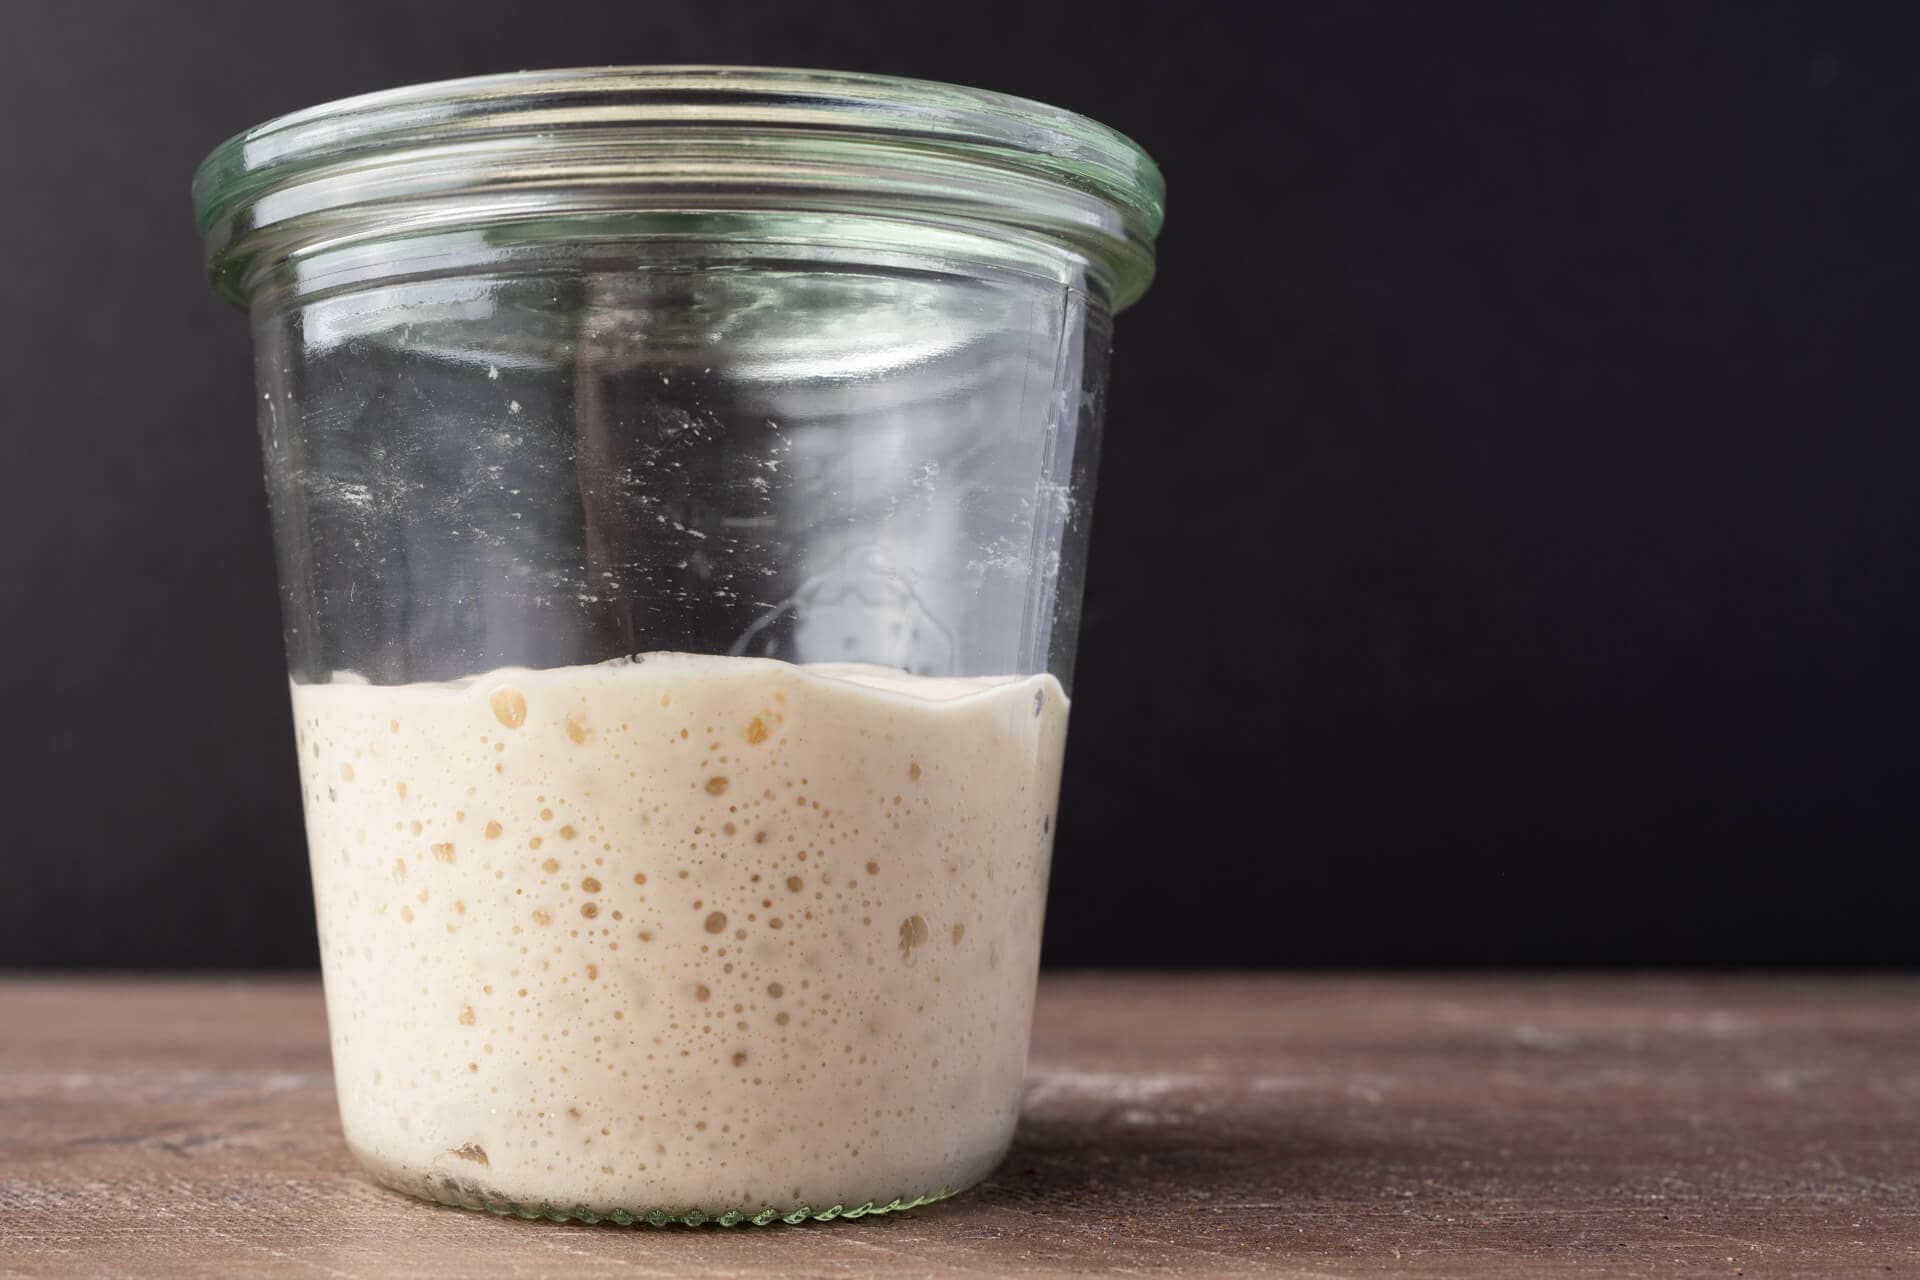 https://www.theperfectloaf.com/wp-content/uploads/2020/03/theperfectloaf-keeping-a-smaller-sourdough-starter-to-reduce-waste-1.jpg